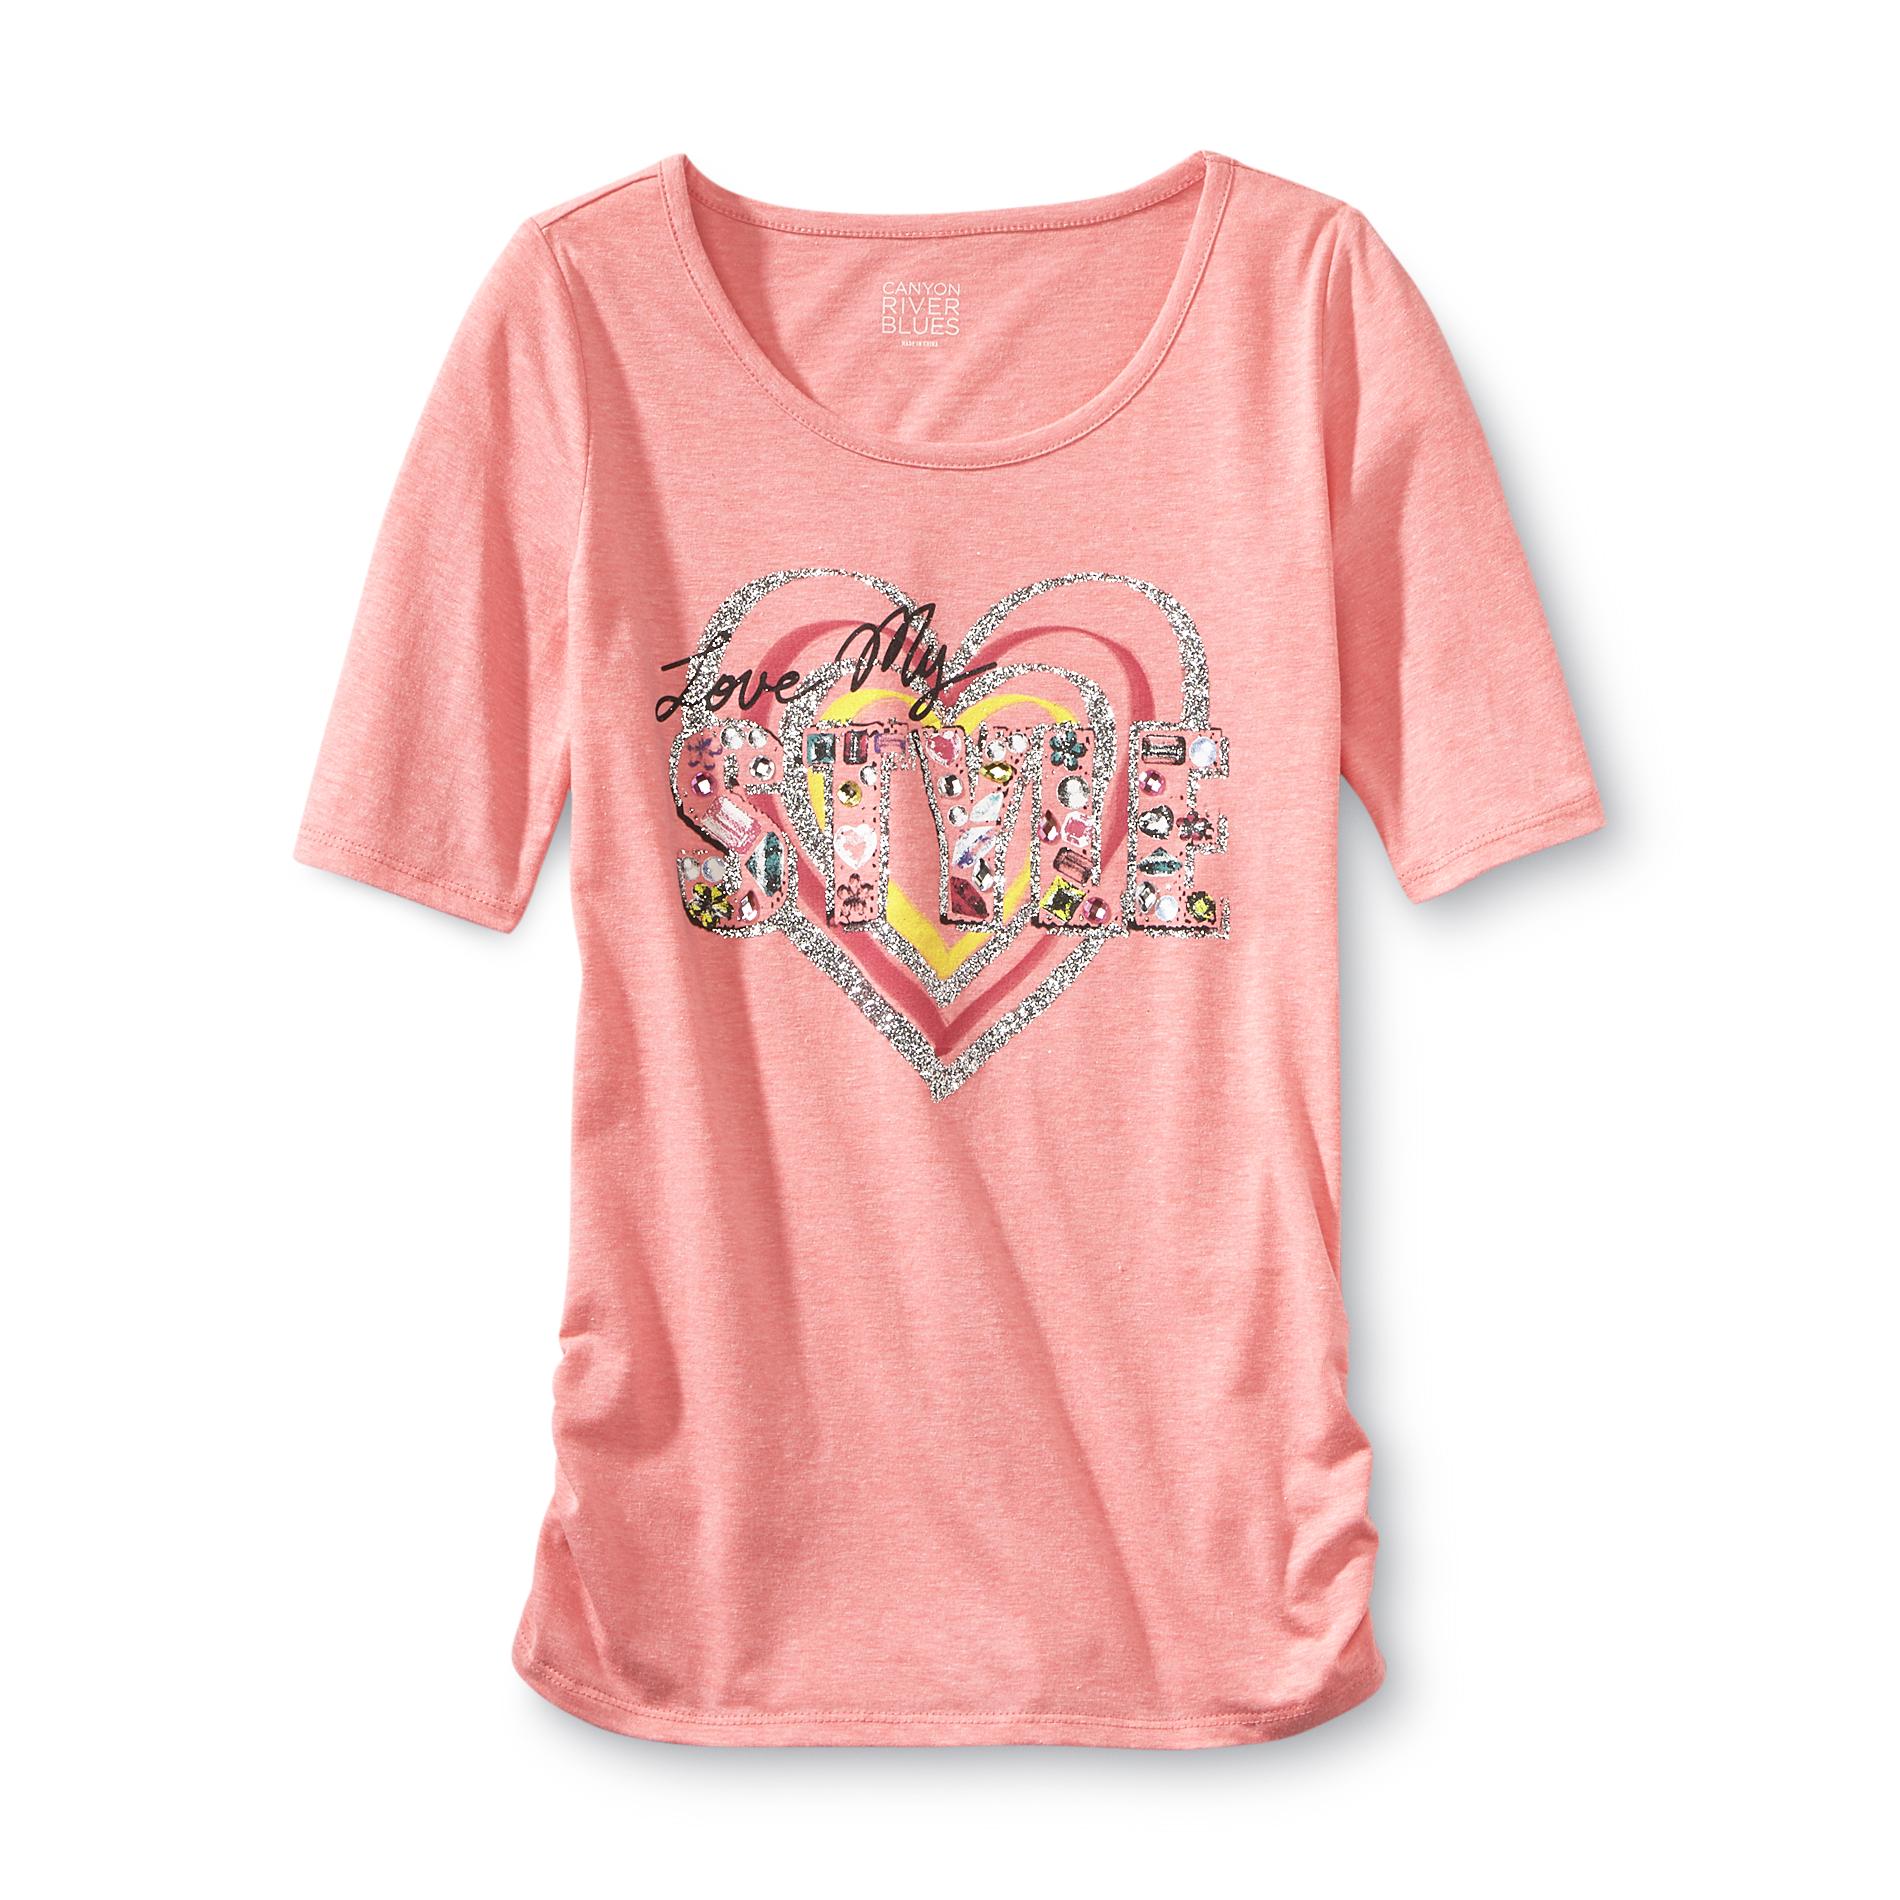 Canyon River Blues Girl's Graphic T-Shirt - Love My Style